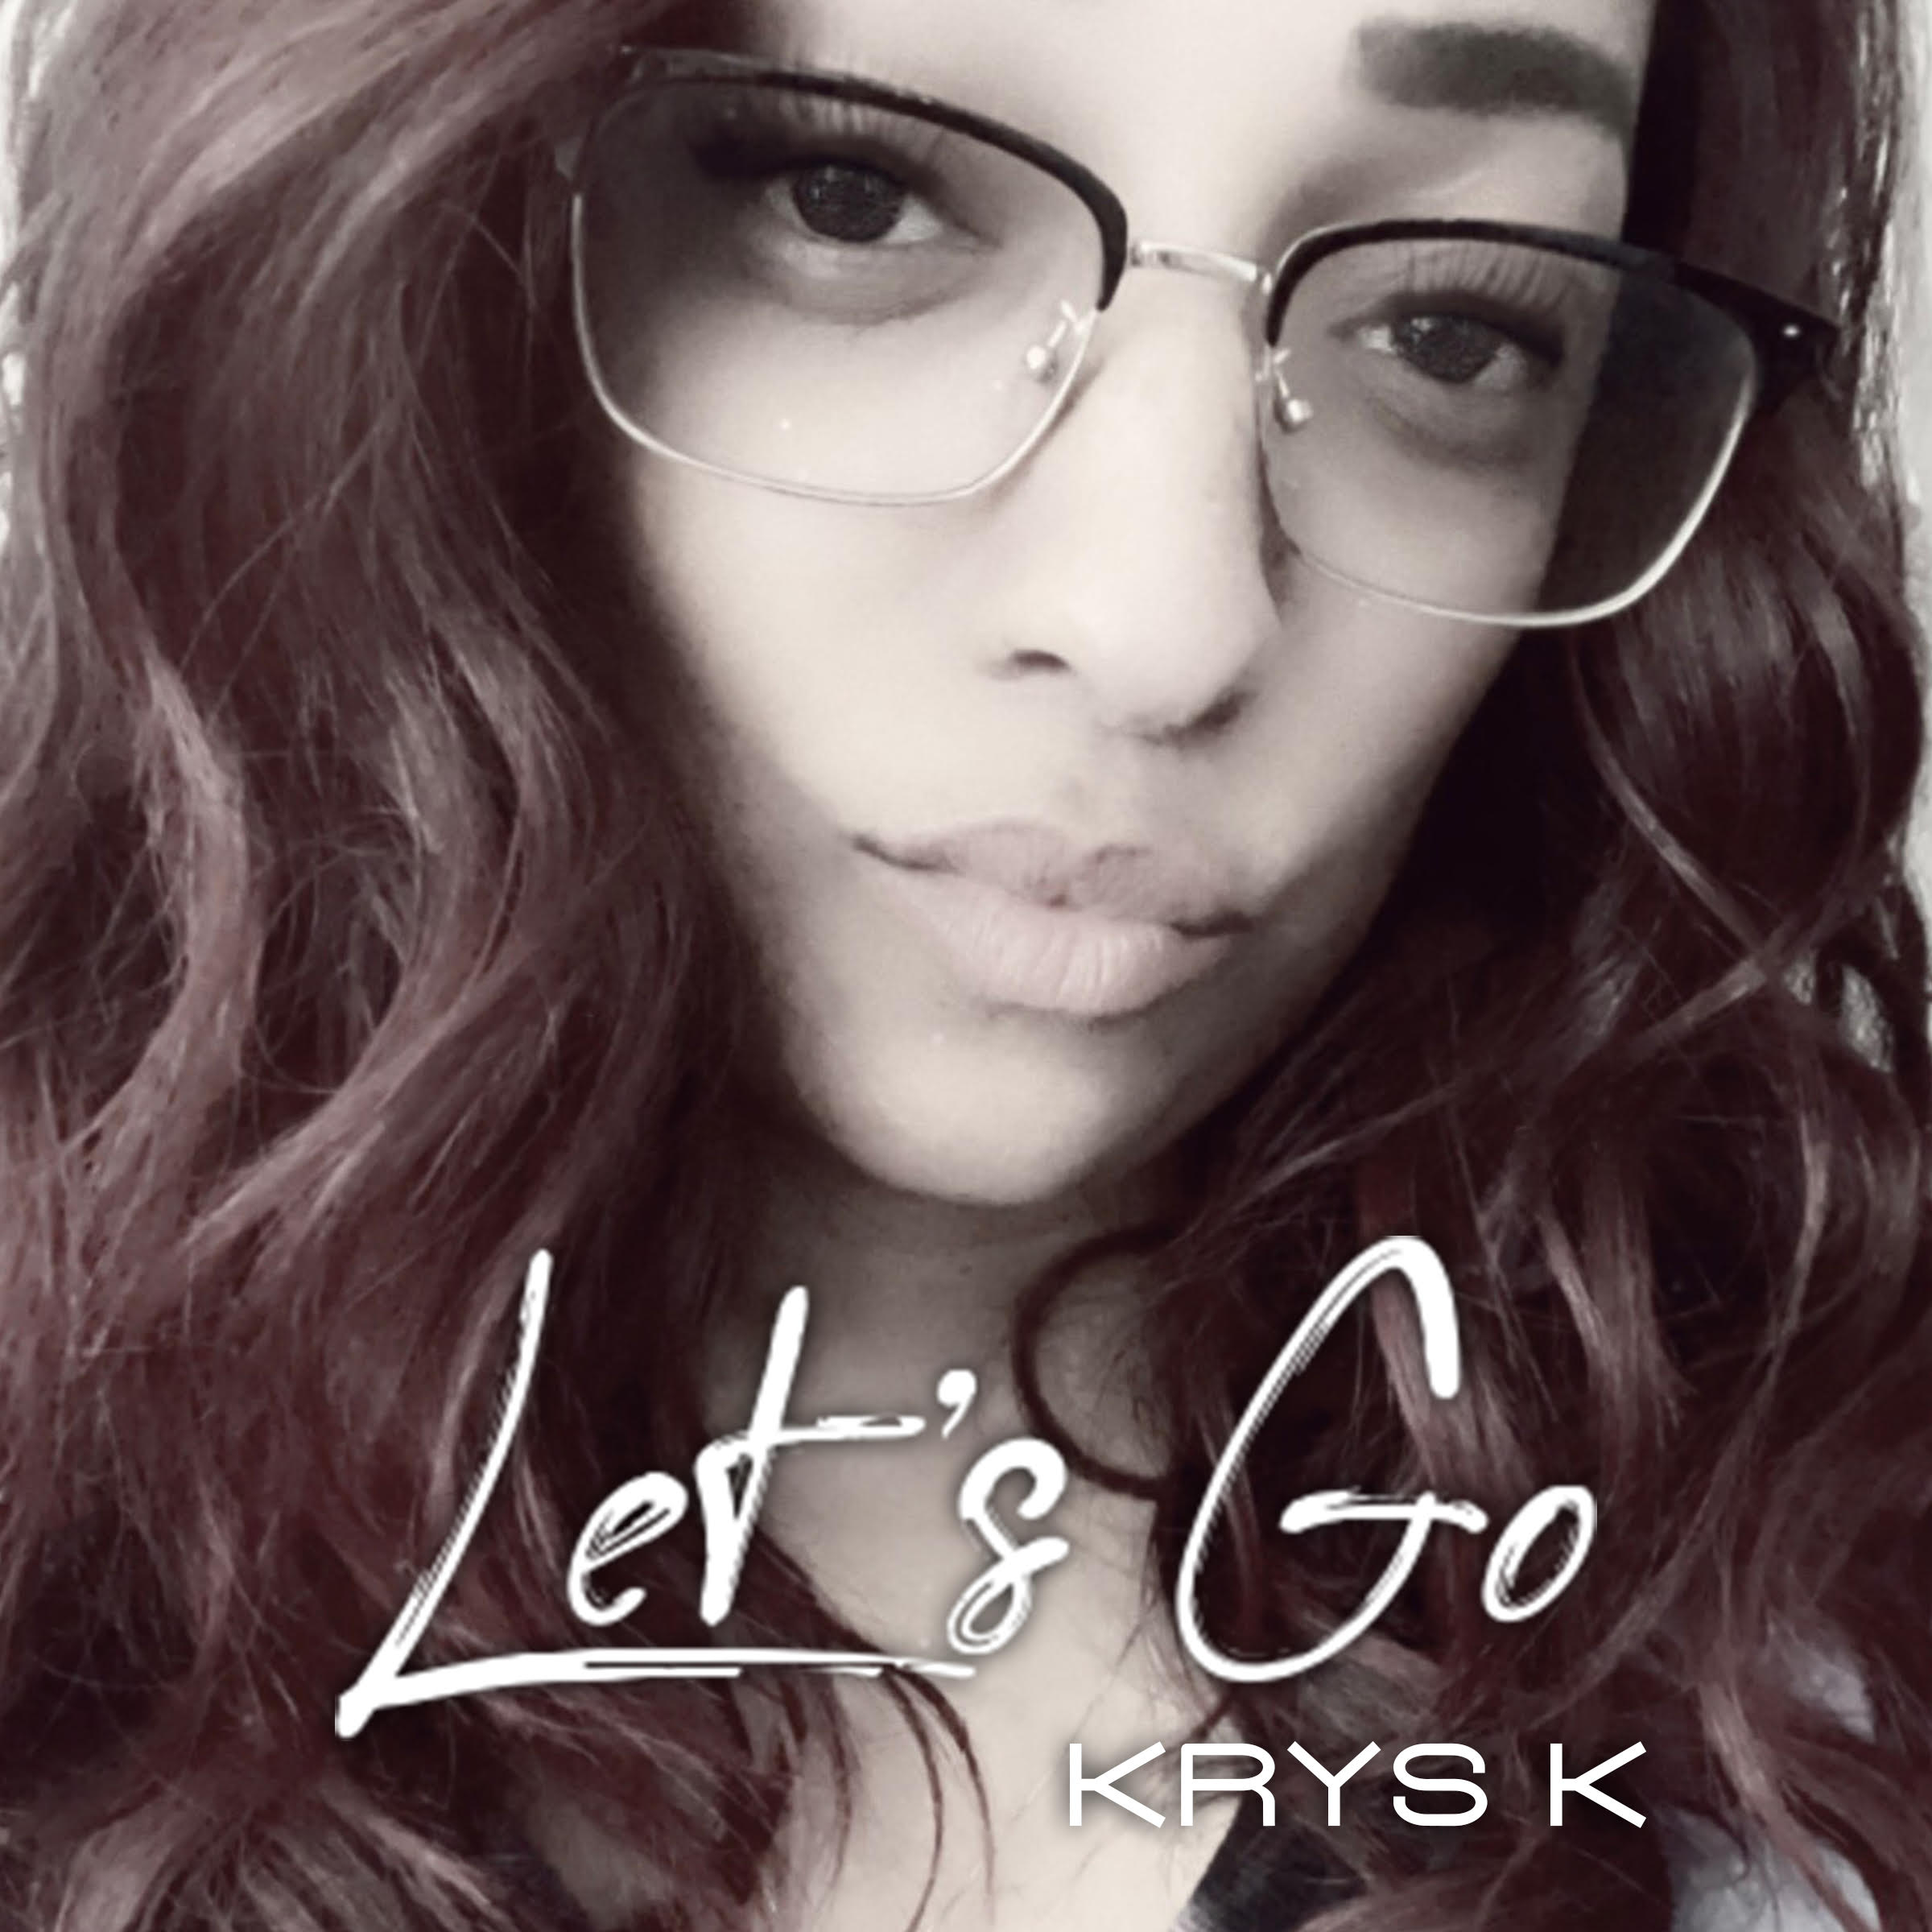 krys-k-has-just-released-her-newest-single-let-s-go-hosted-by-multi